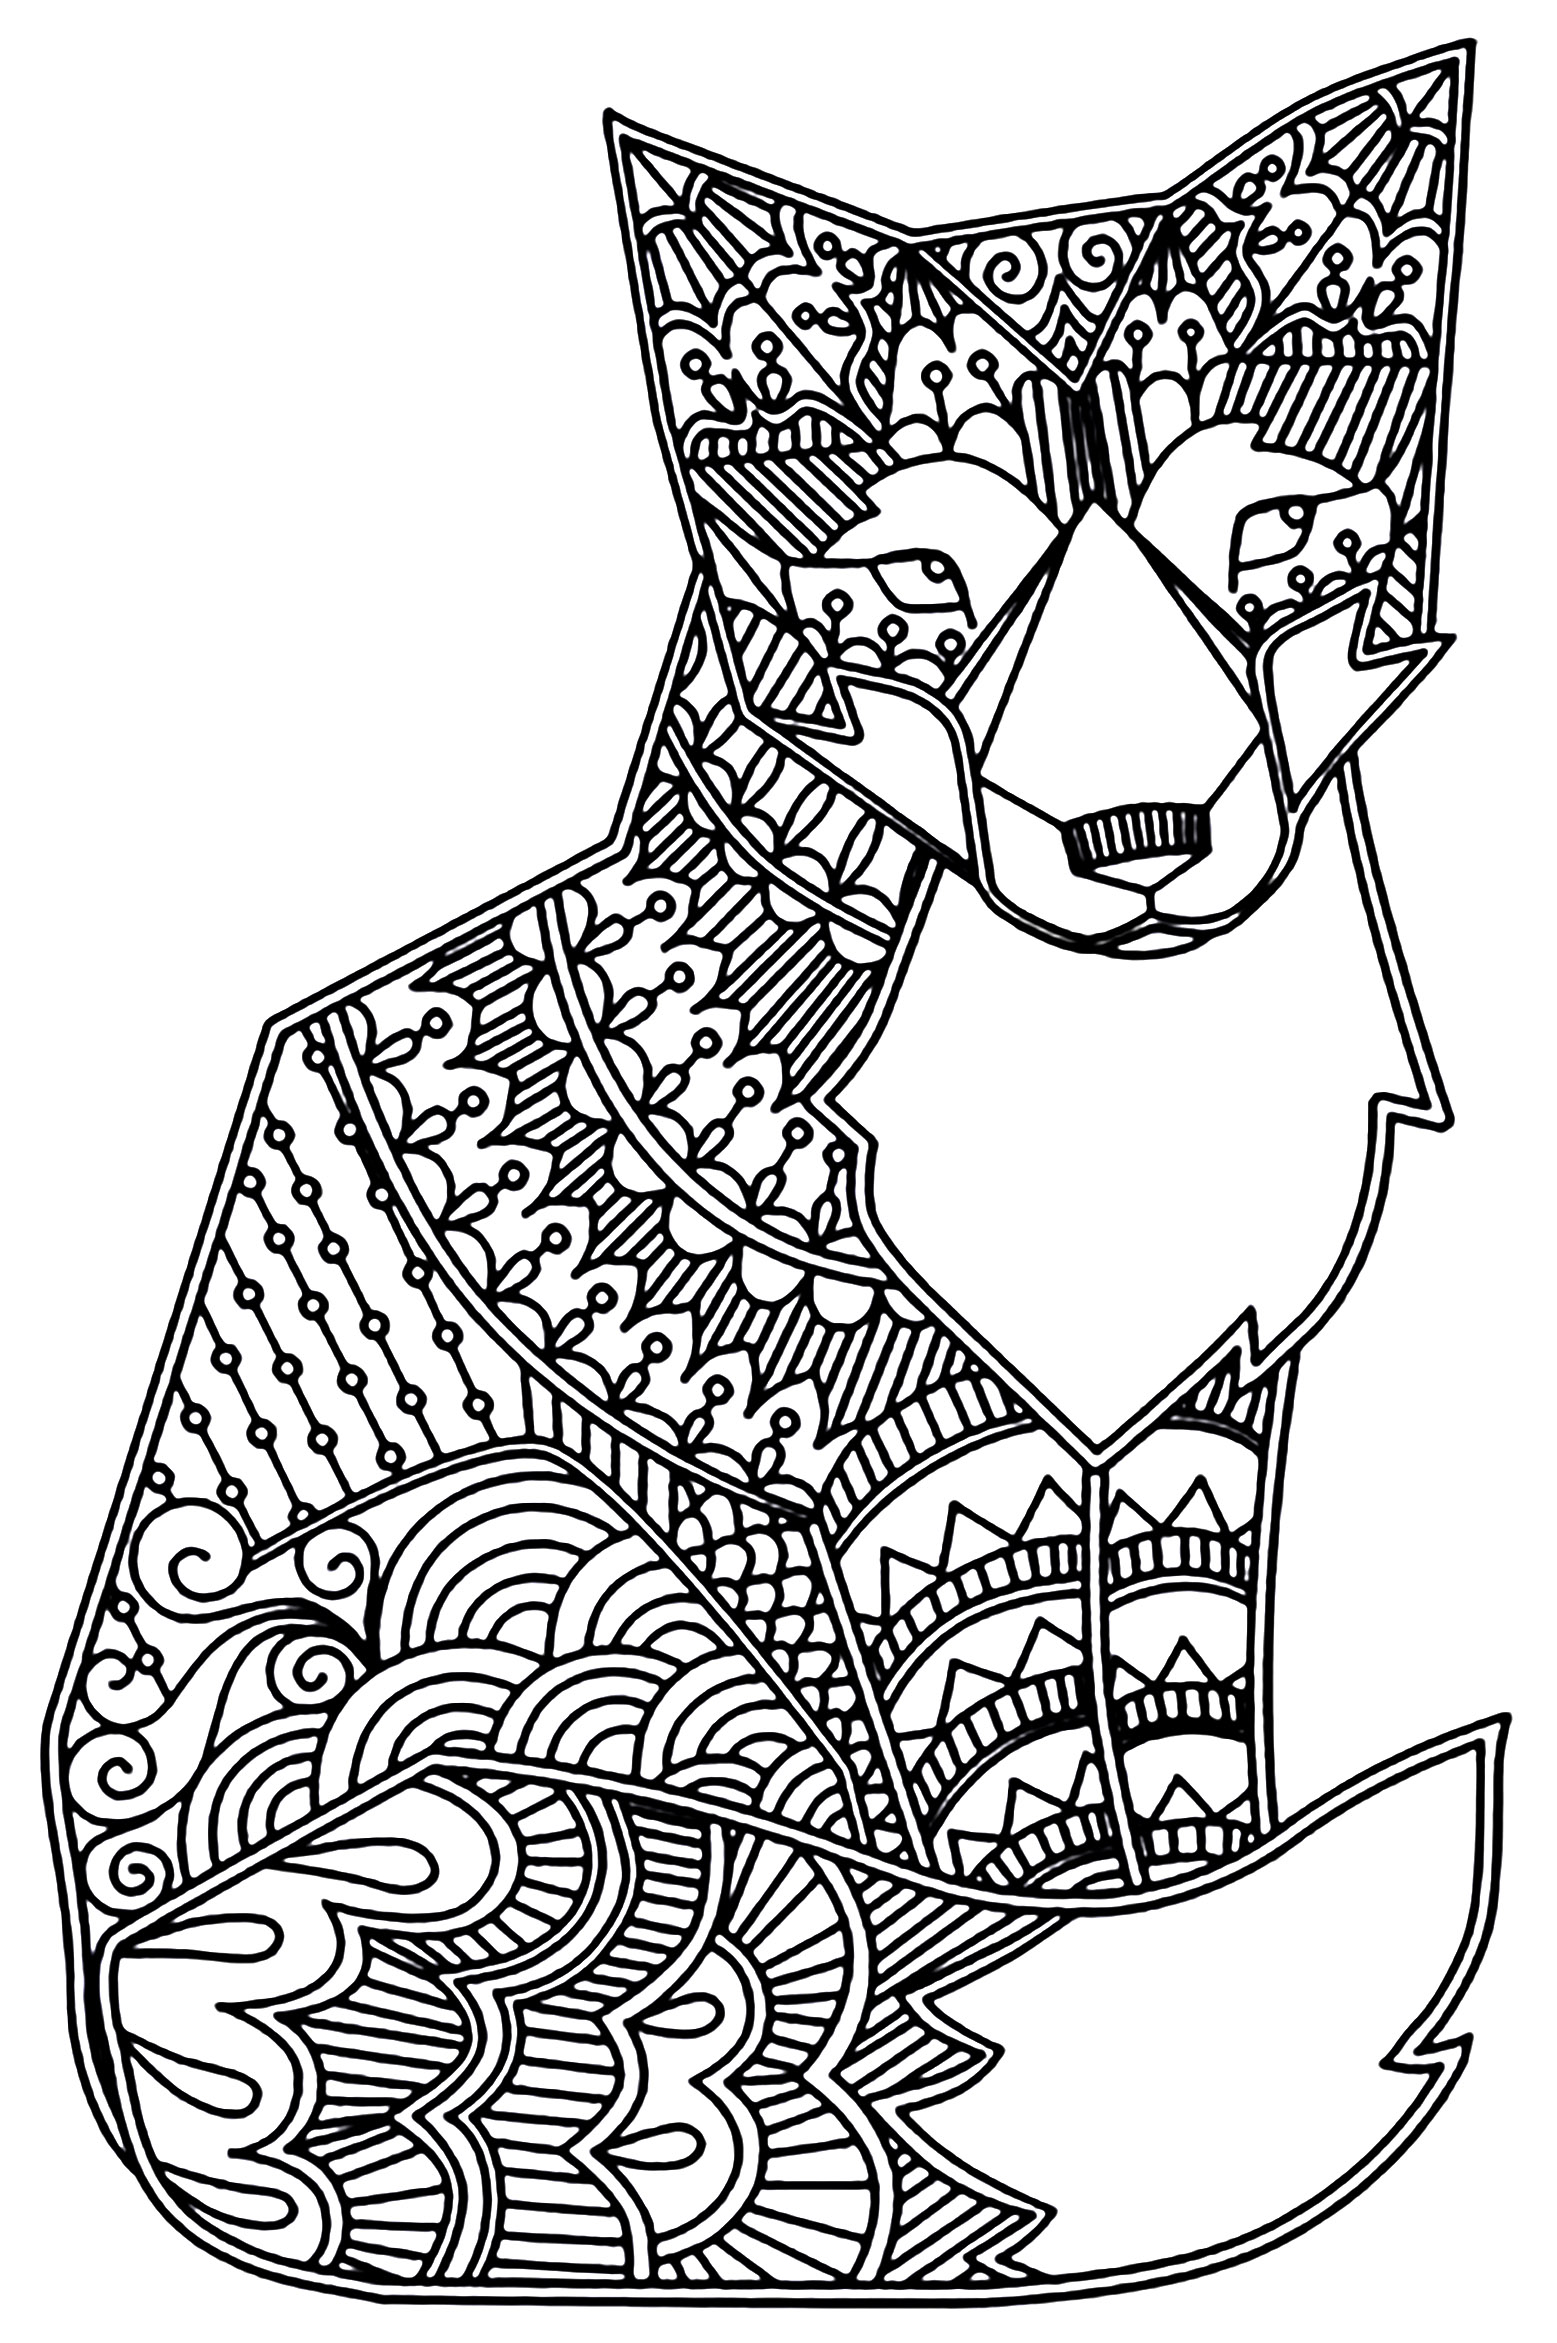 Fox - Foxes Adult Coloring Pages